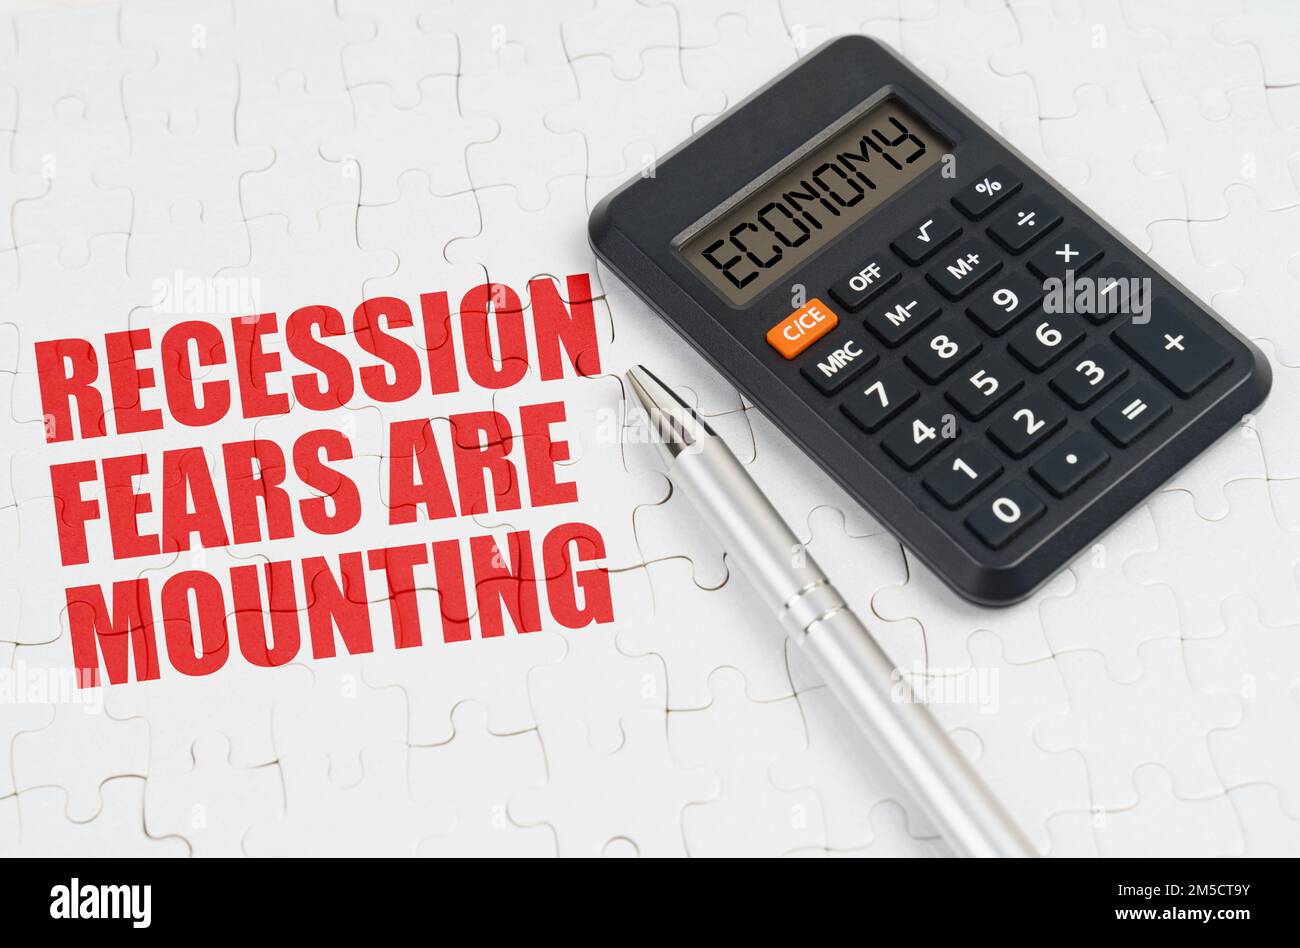 Business concept. On the puzzles lies a calculator and a pen, next to the inscription - Recession fears are mounting Stock Photo